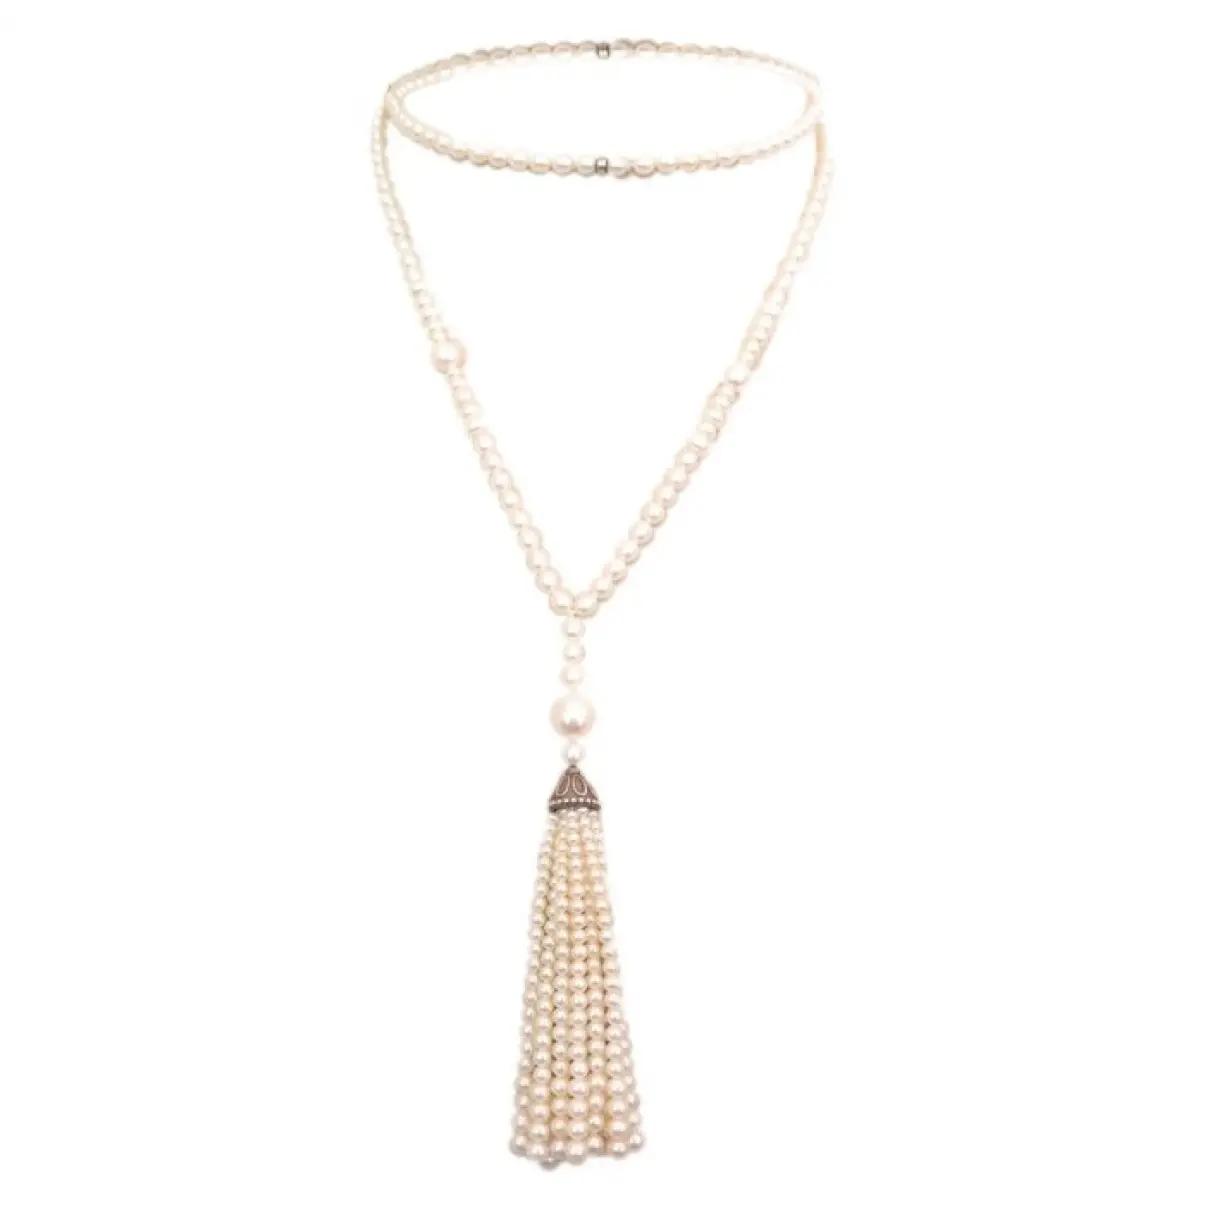 Pearls necklace Tiffany & Co